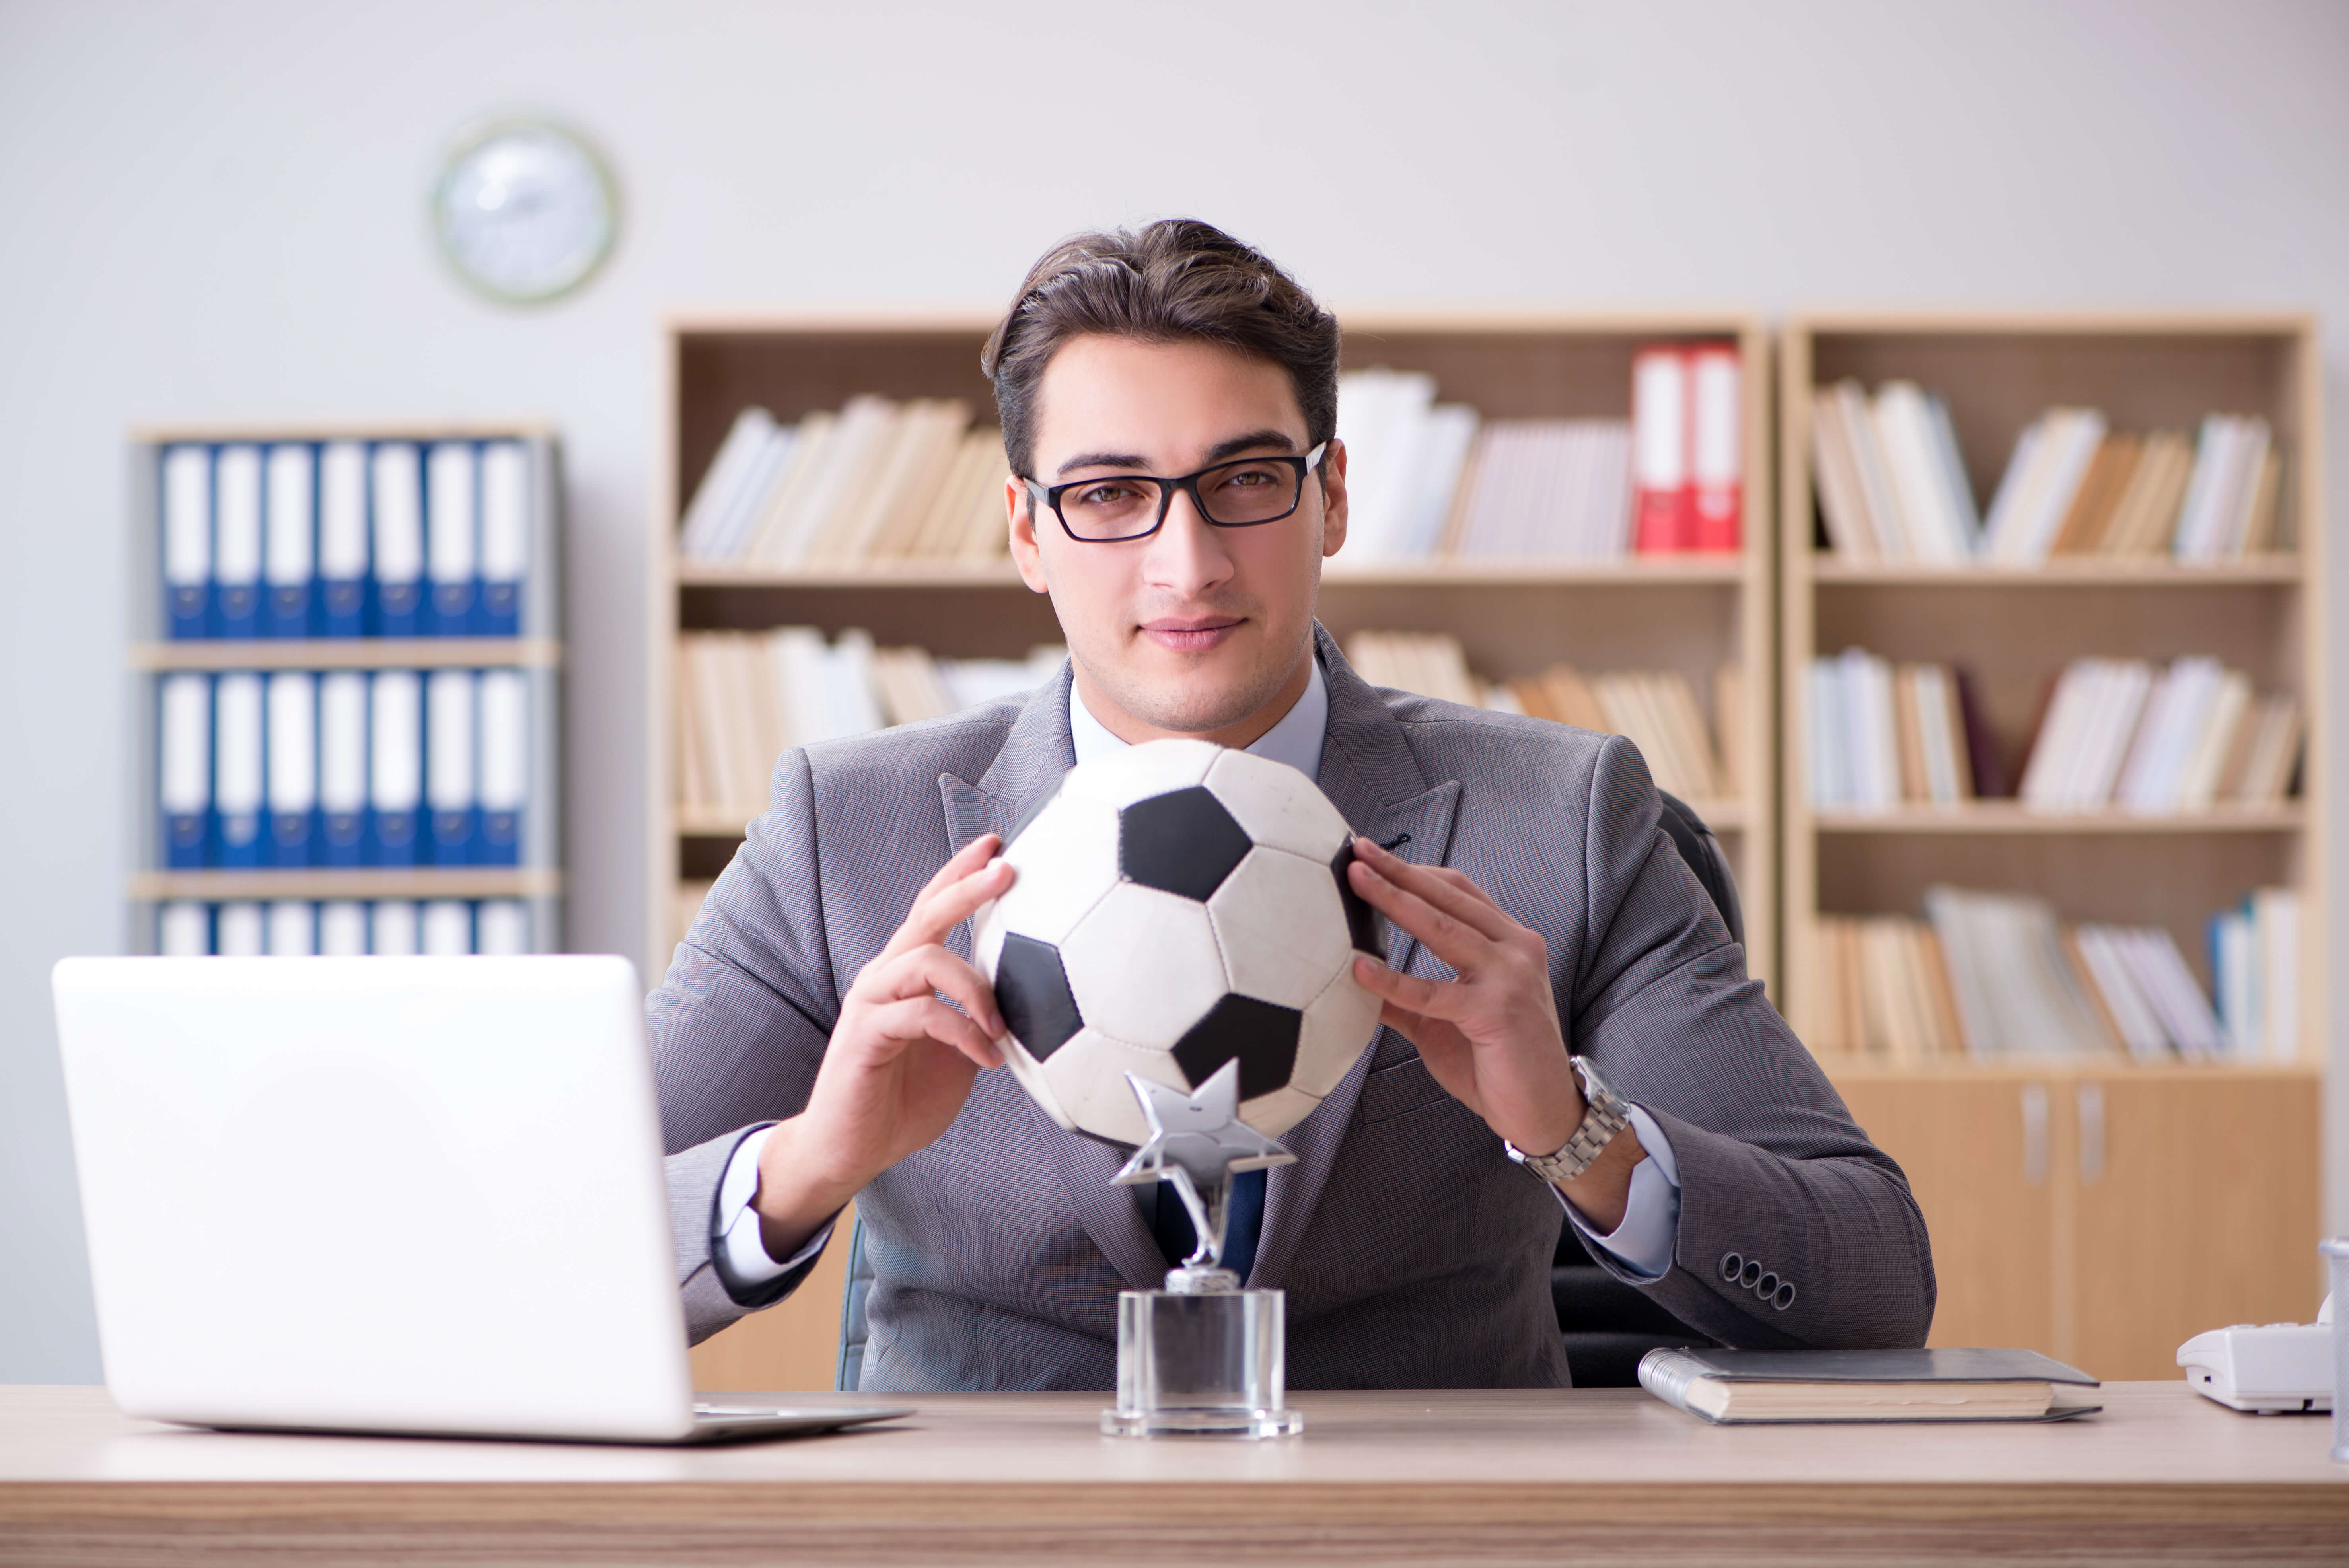 Sports Management - Sports Management Degree Guide